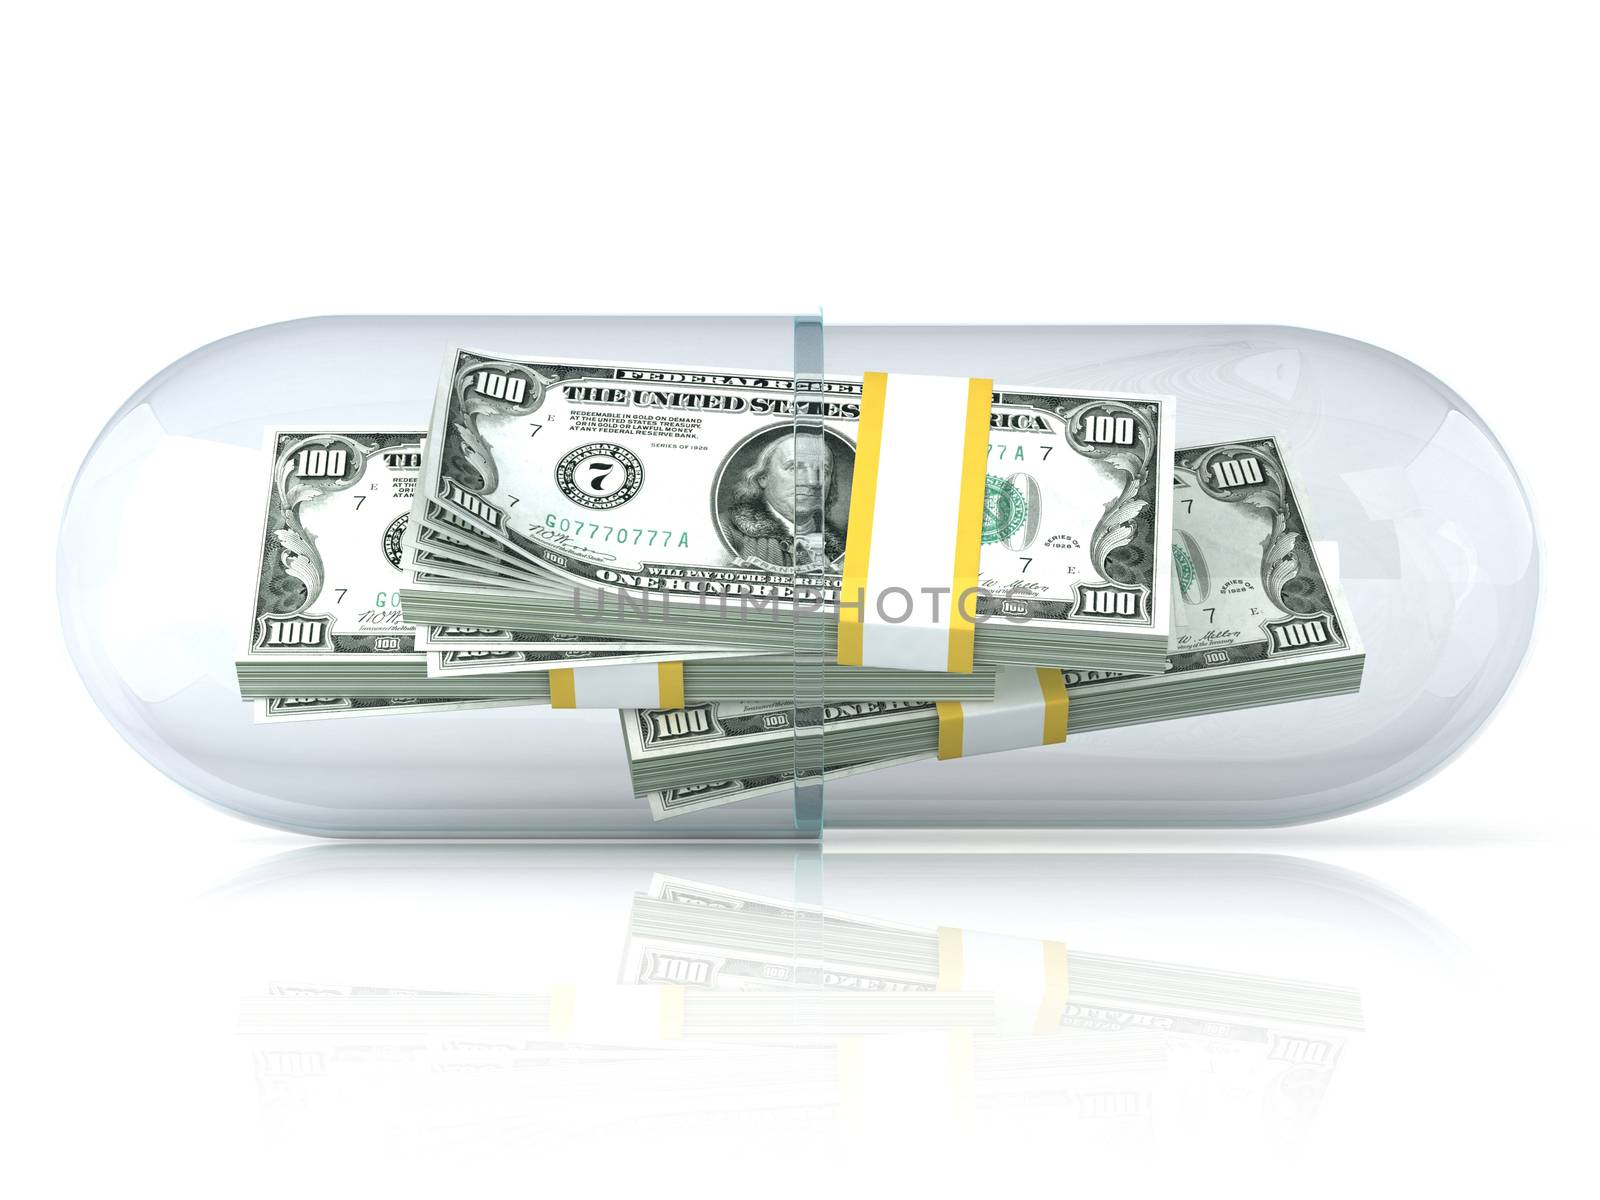 Transparent pill capsule, with dollars stack inside. Isolated on white background. 3D render illustration